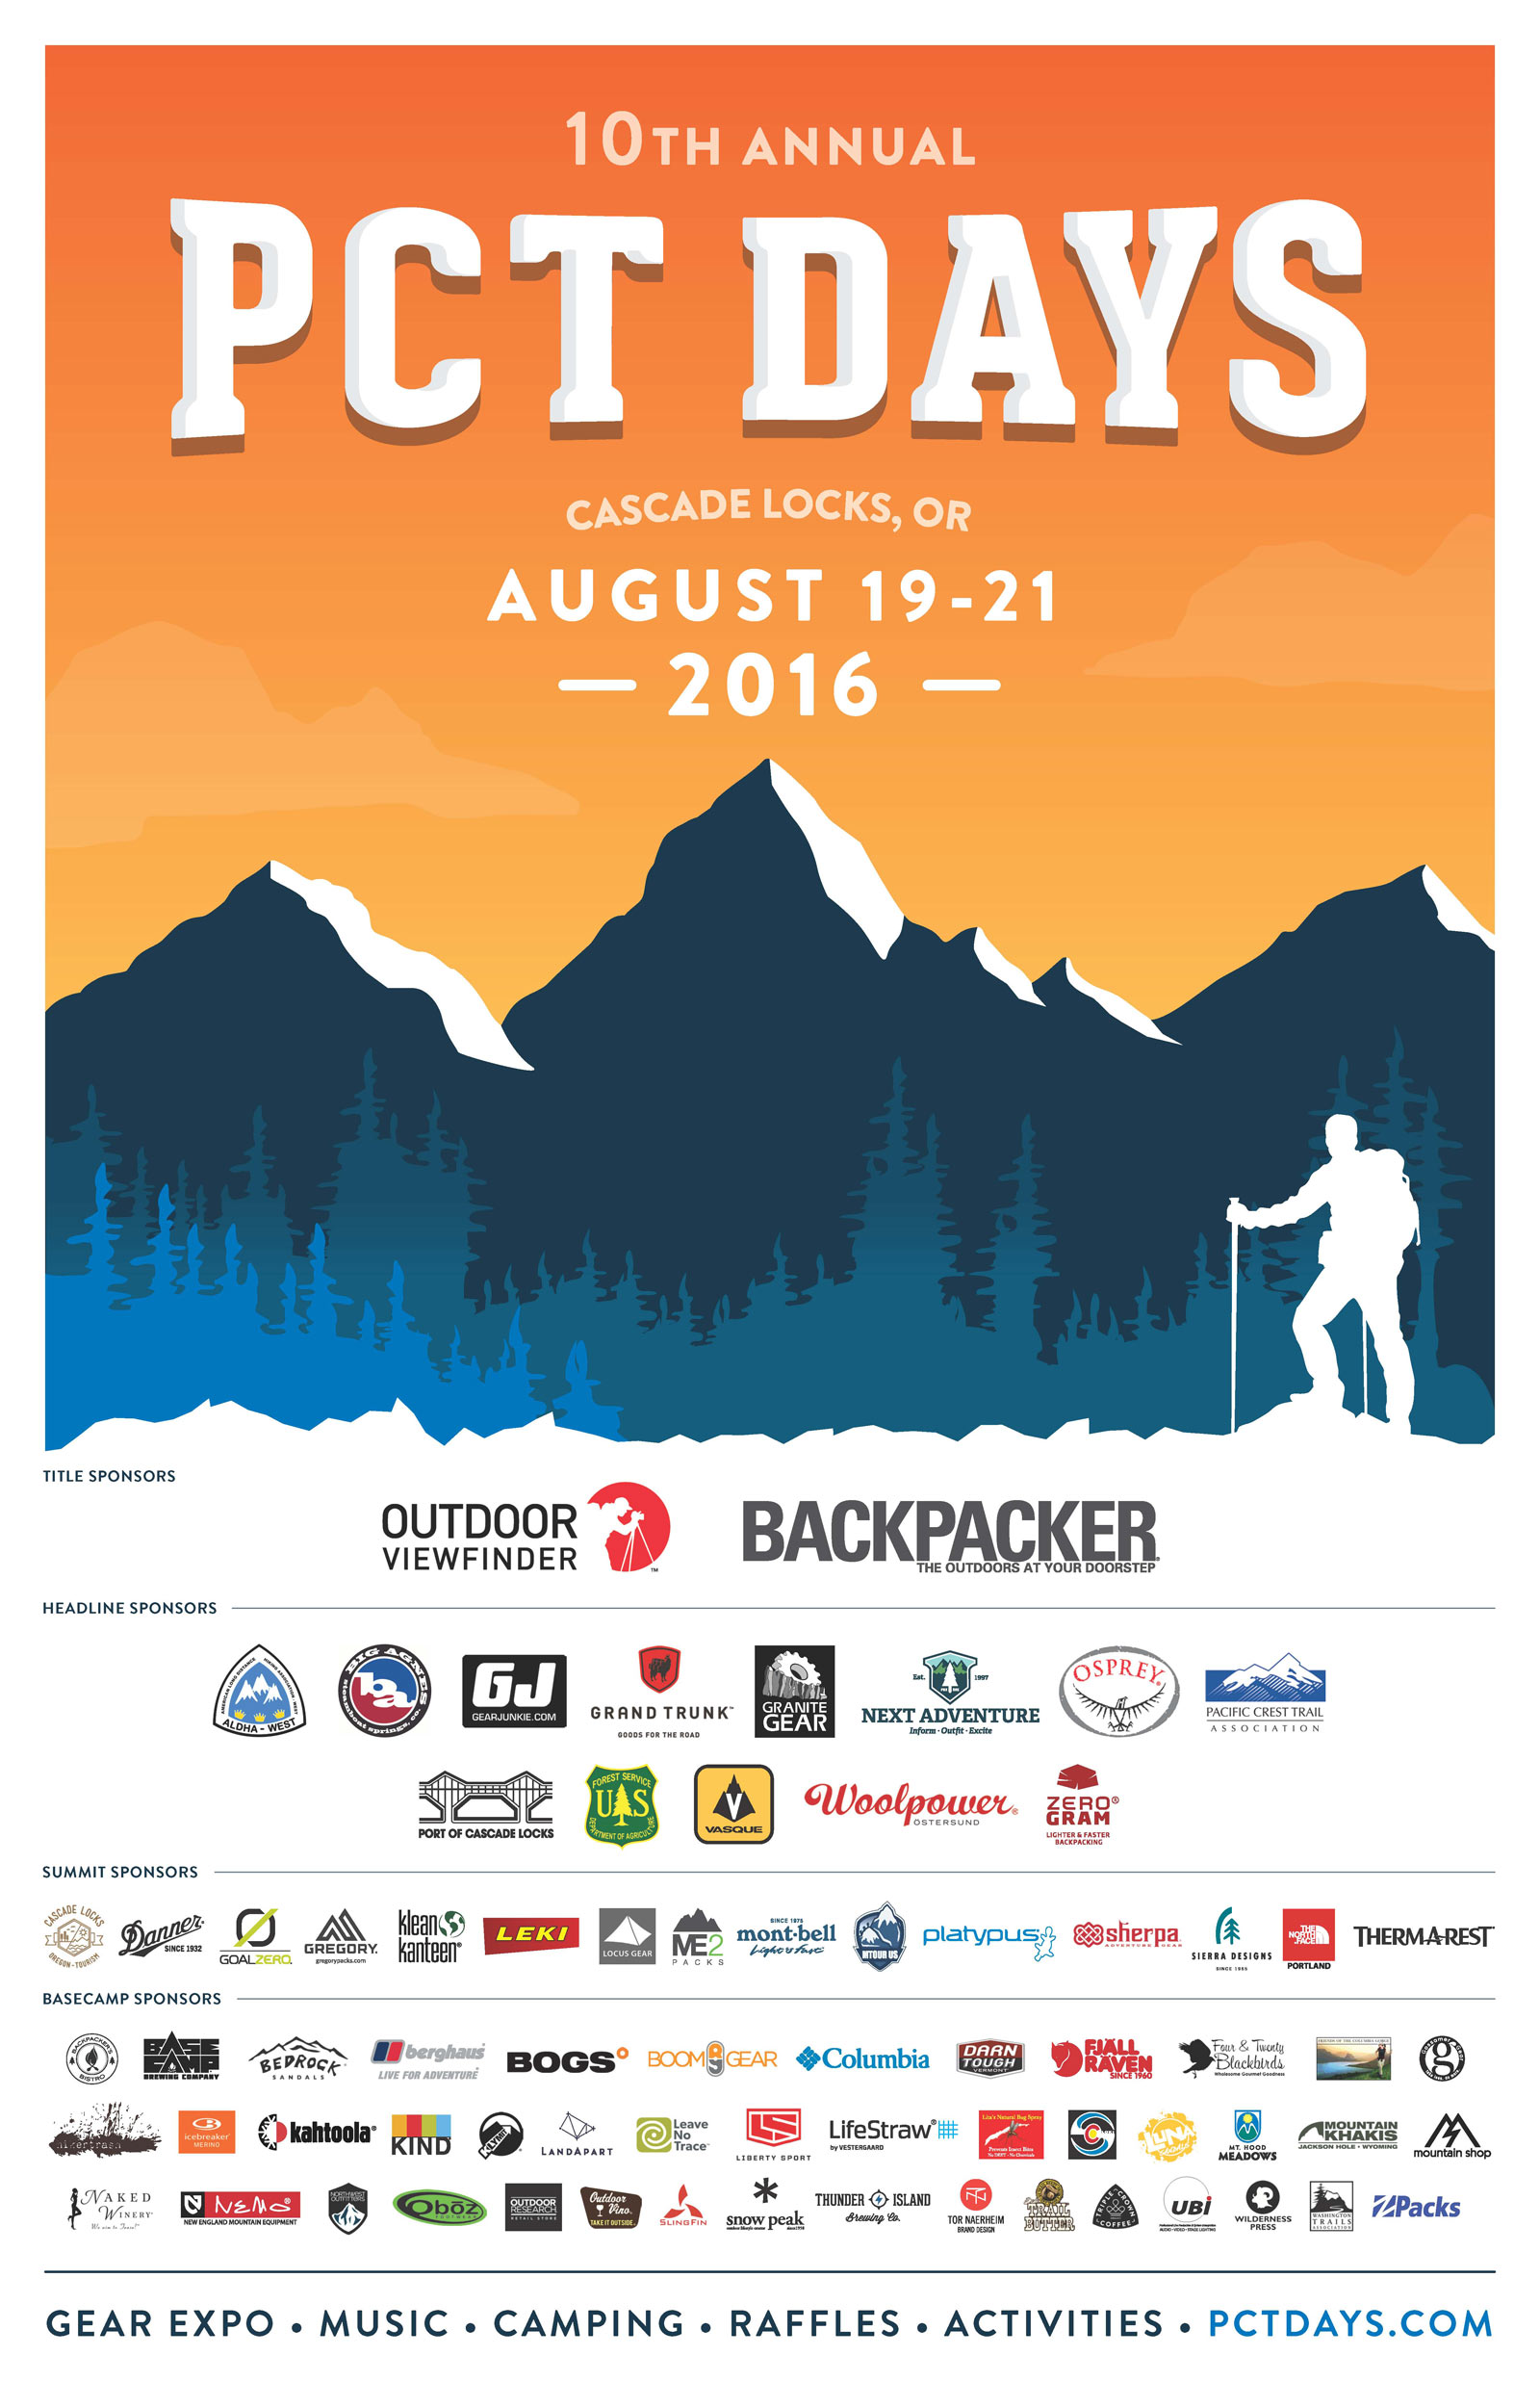 PCT Days in Cascade Locks. Pacific Crest Trail Days takes place in Cascade Locks near the Bridge of the Gods on August 19-21, 2016. 